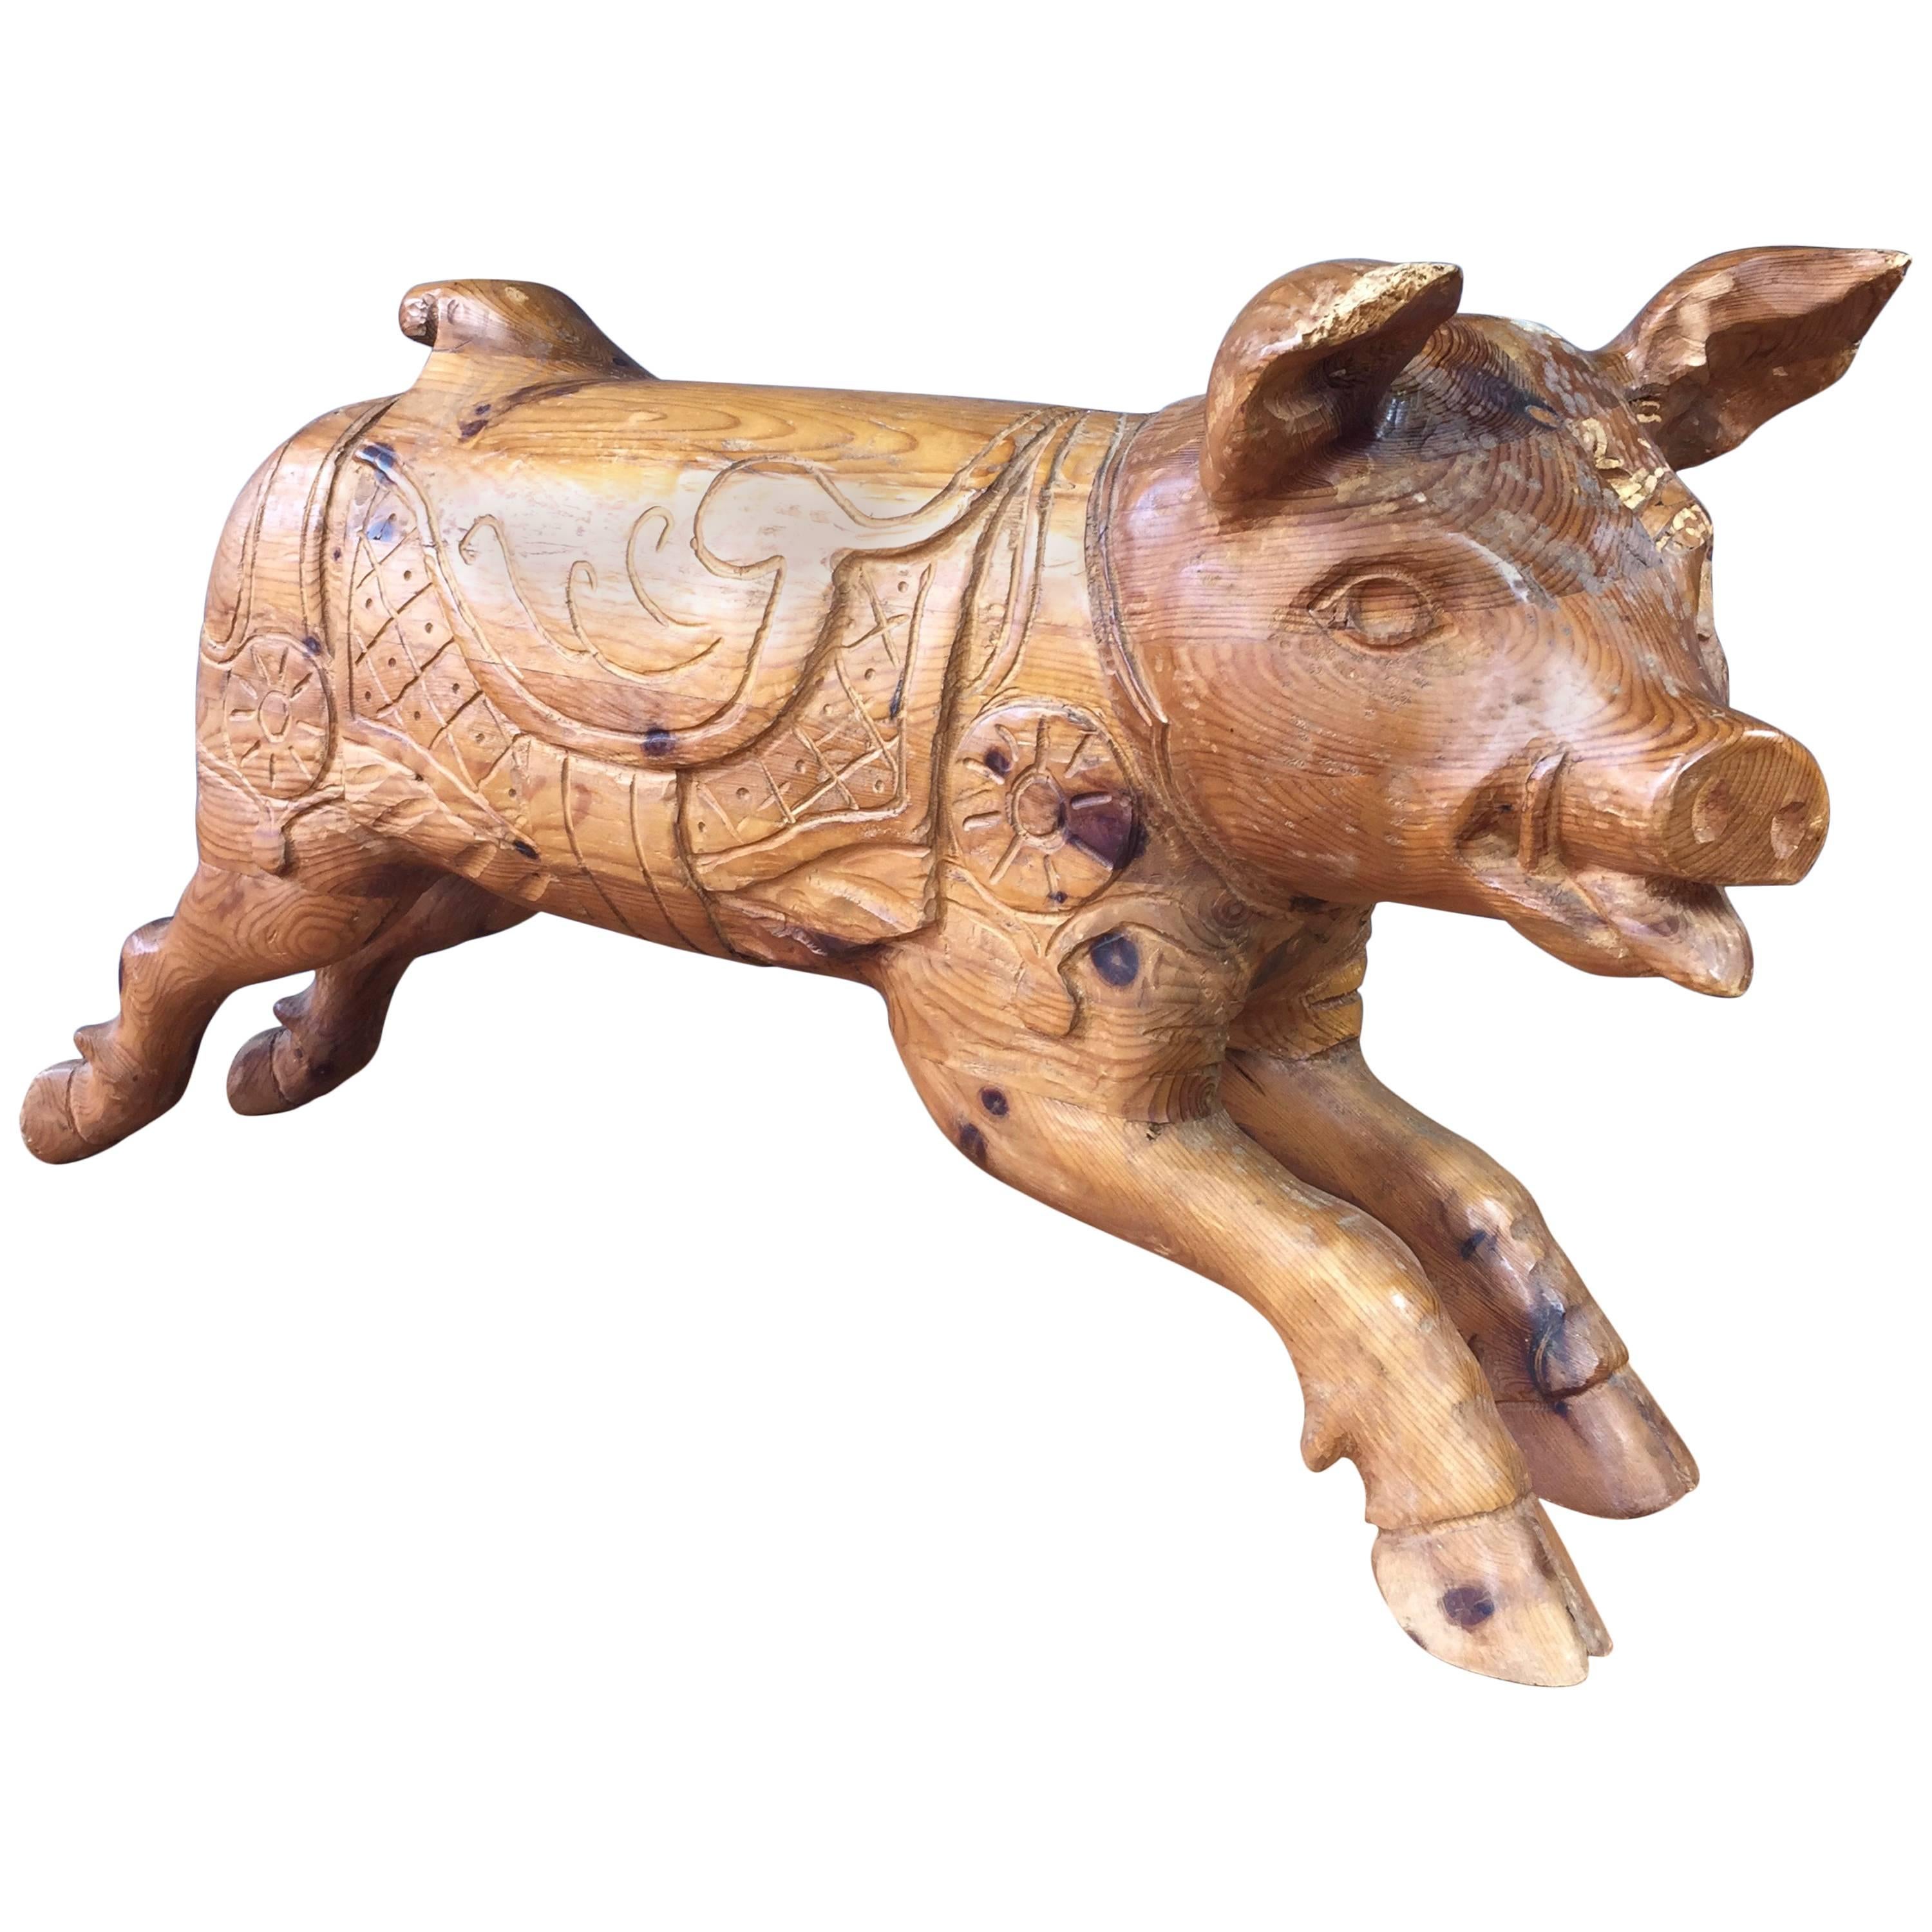 Lifesize Carved Wood Carousel Pig Sculpture